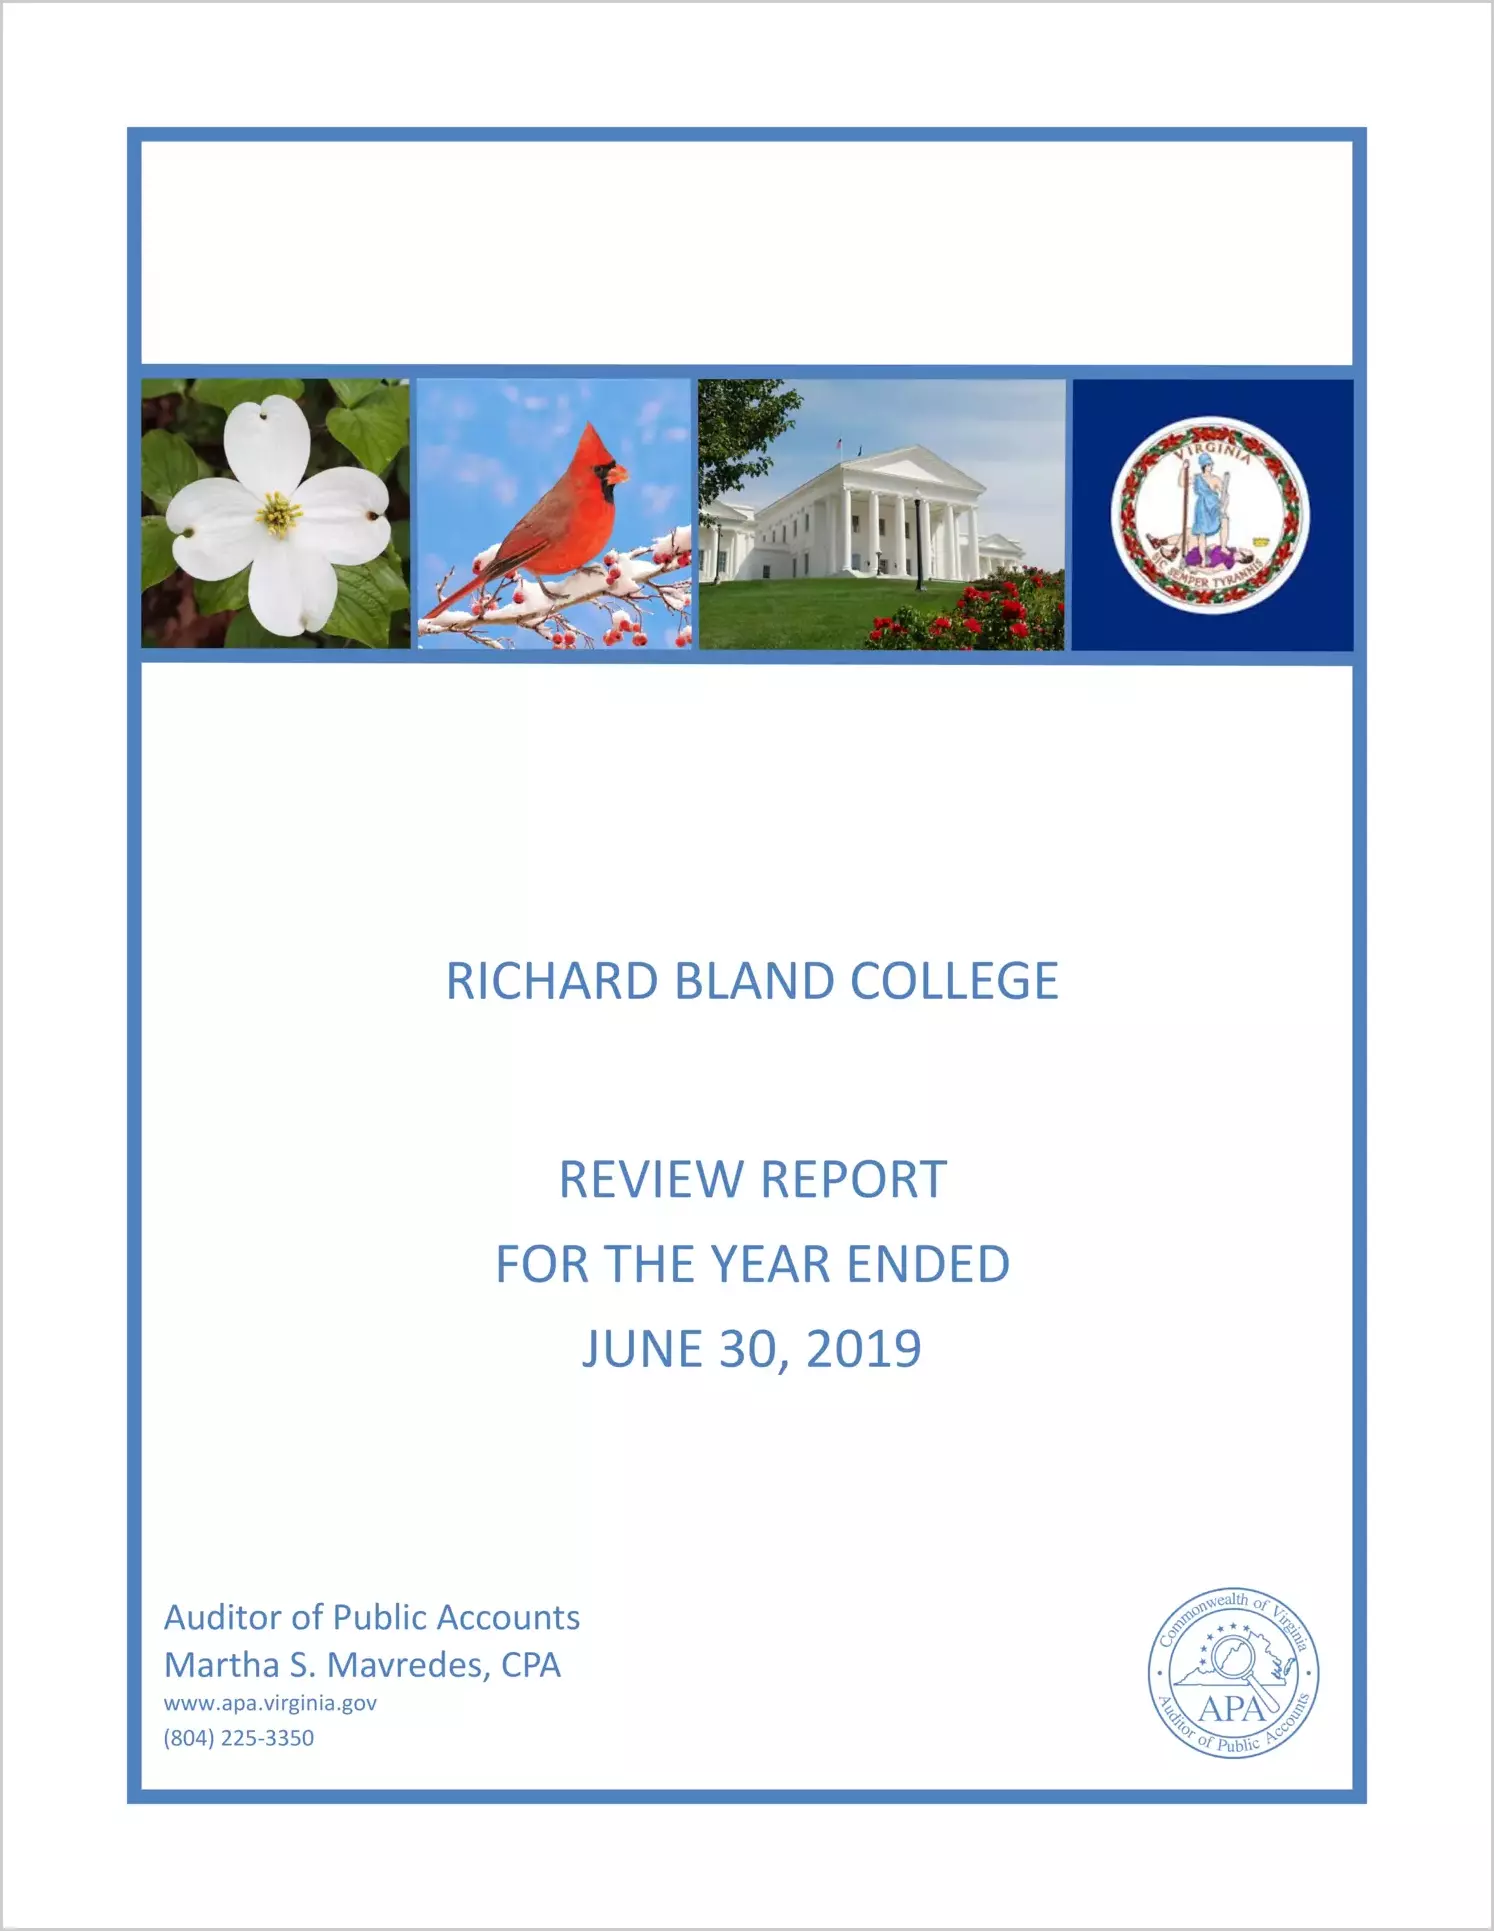 Richard Bland College Review for the year ended June 30, 2019